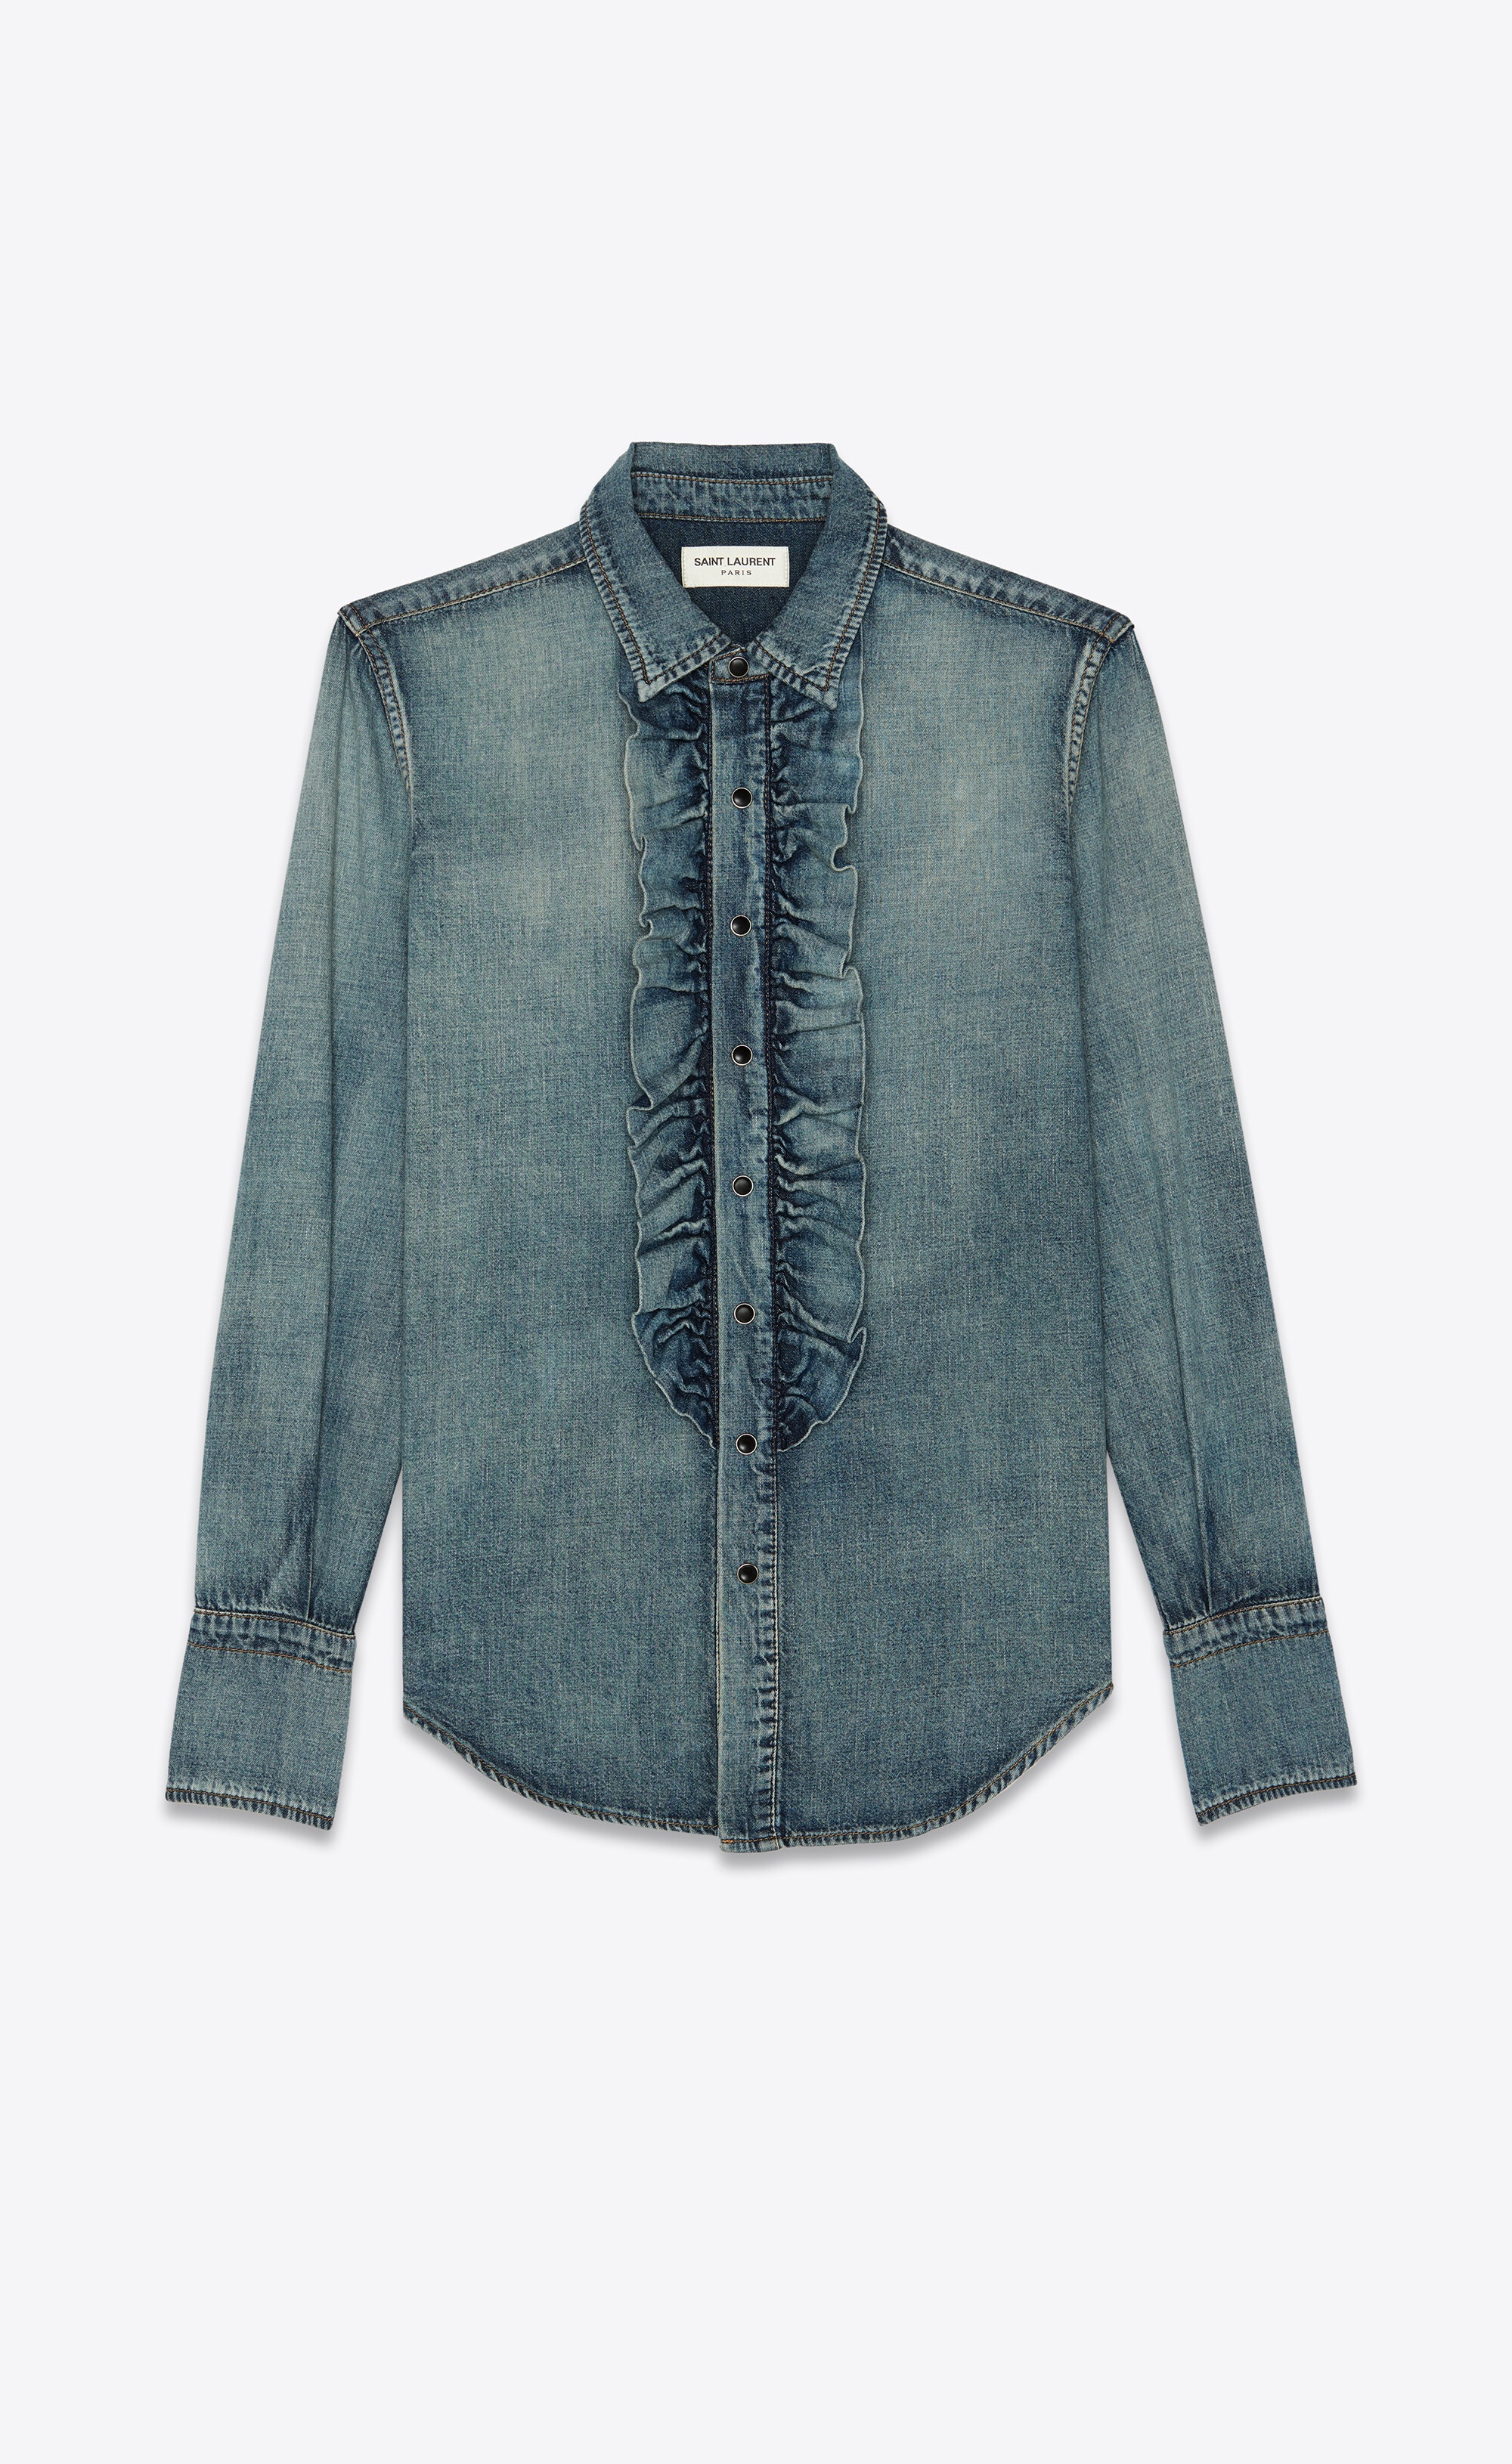 classic shirt with ruffled front in dirty vintage blue denim - 1